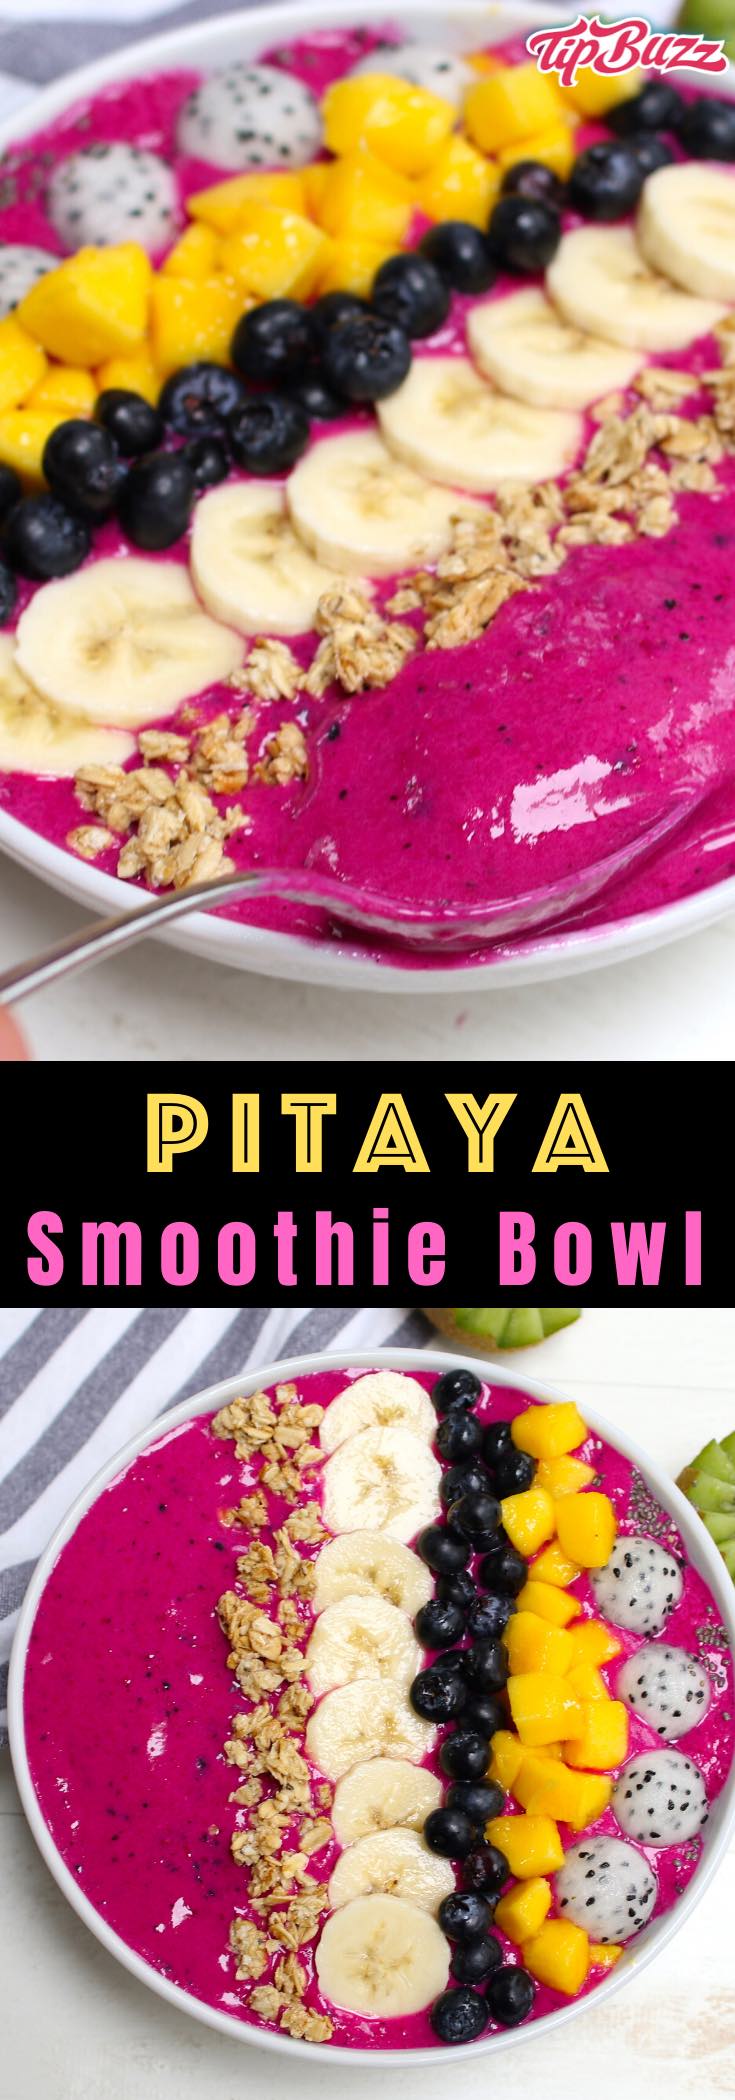 Pitaya Bowl is a delicious smoothie bowl made with dragon fruit, banana and almond milk with optional topping like granola and fresh fruits